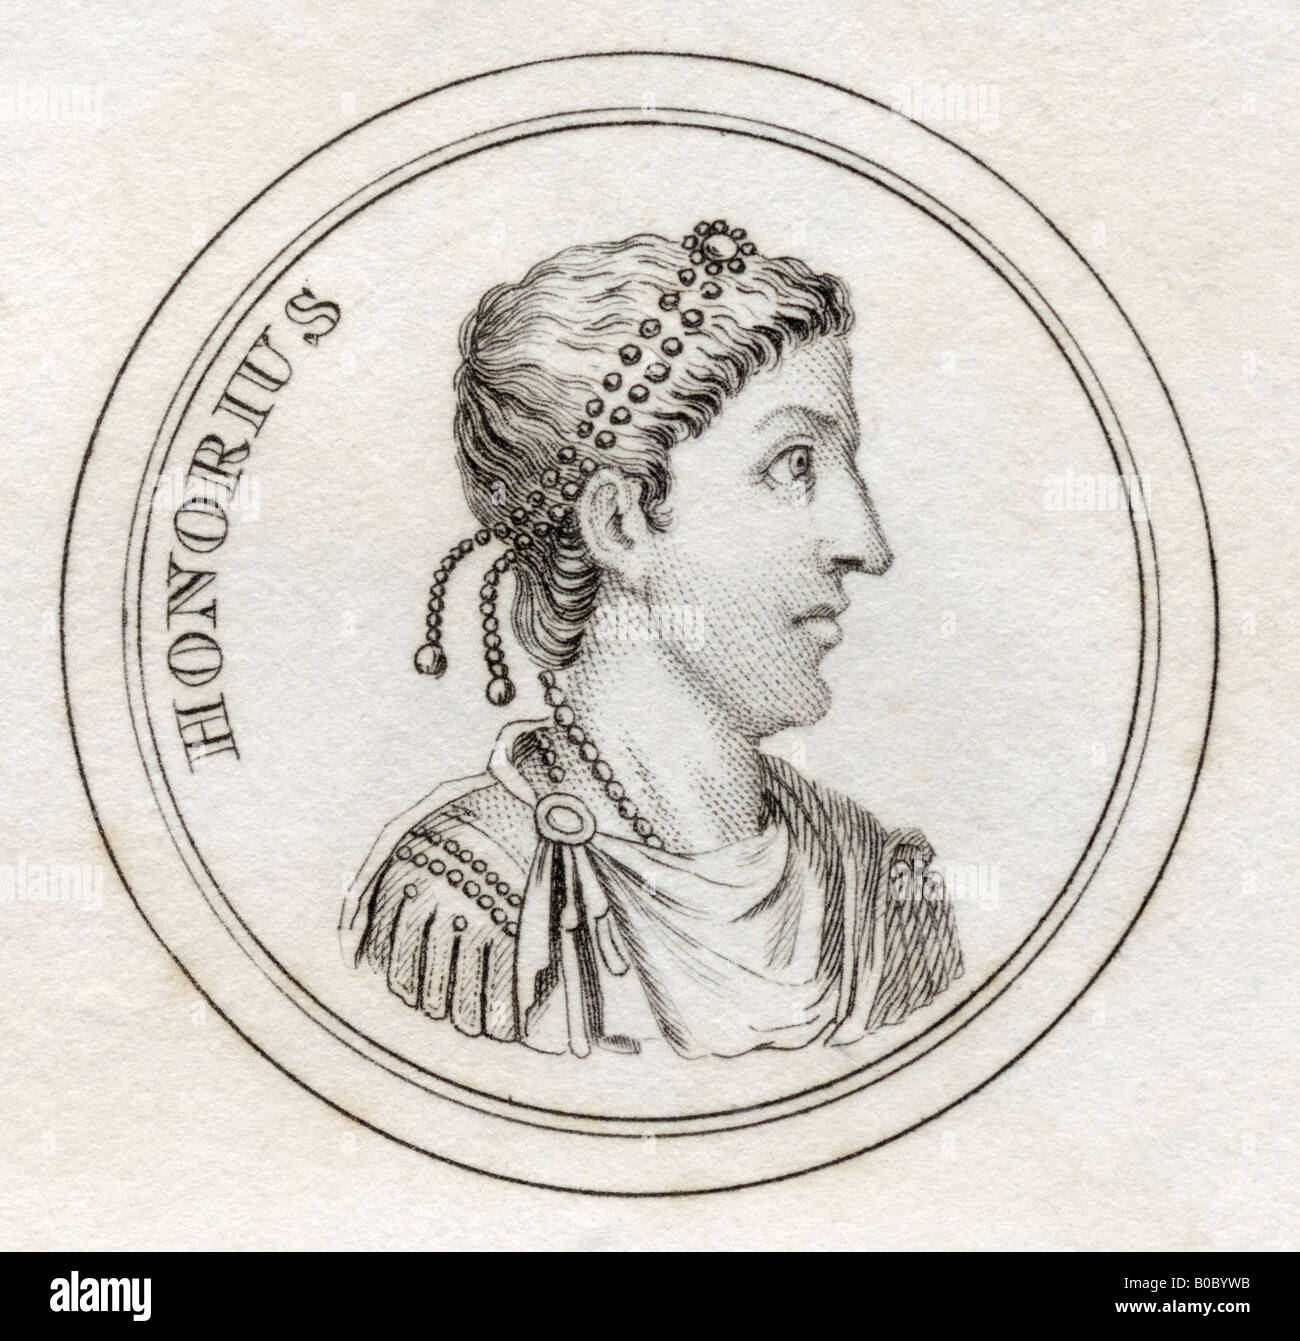 Flavius Honorius, 384 - 423. Roman emperor. From the book Crabbs Historical Dictionary published 1825 Stock Photo